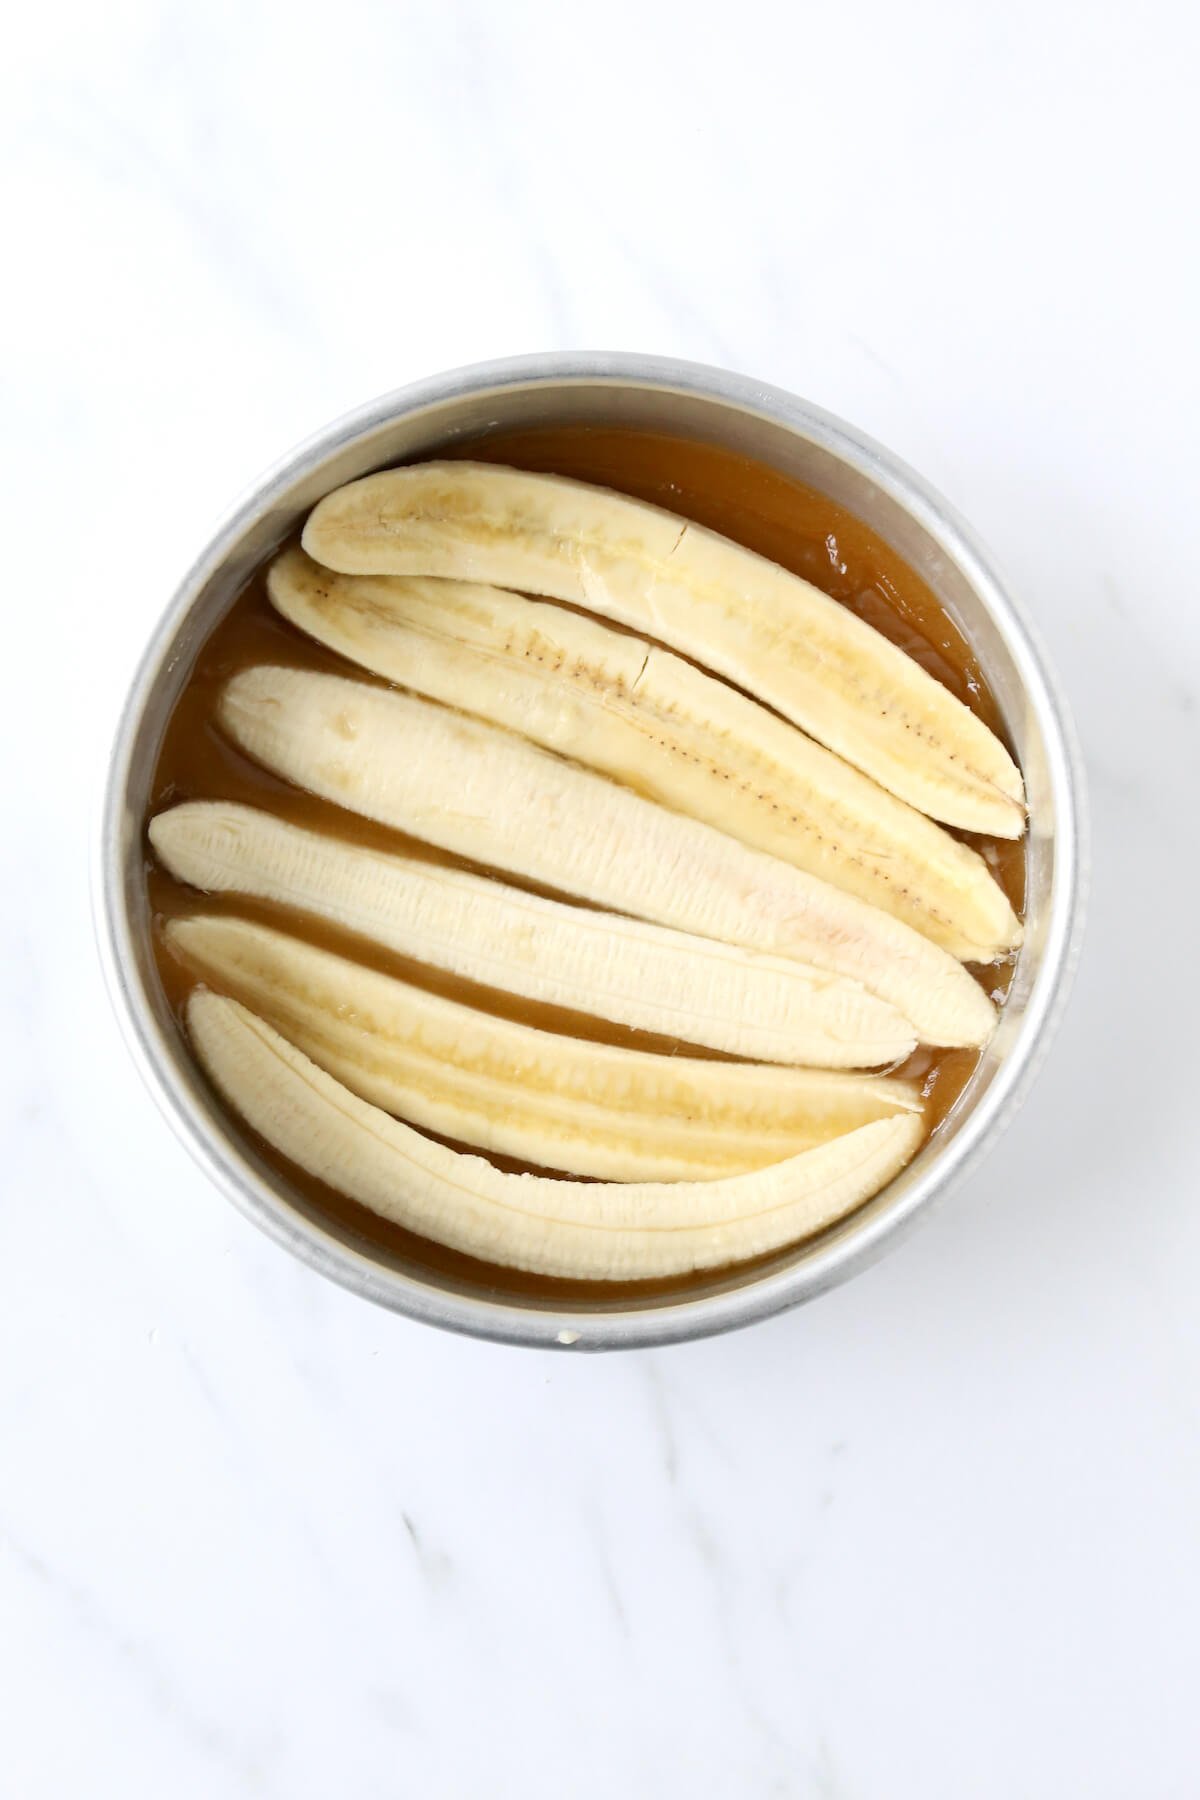 An 8 inch round cake pan filled with caramel sauce and sliced bananas.